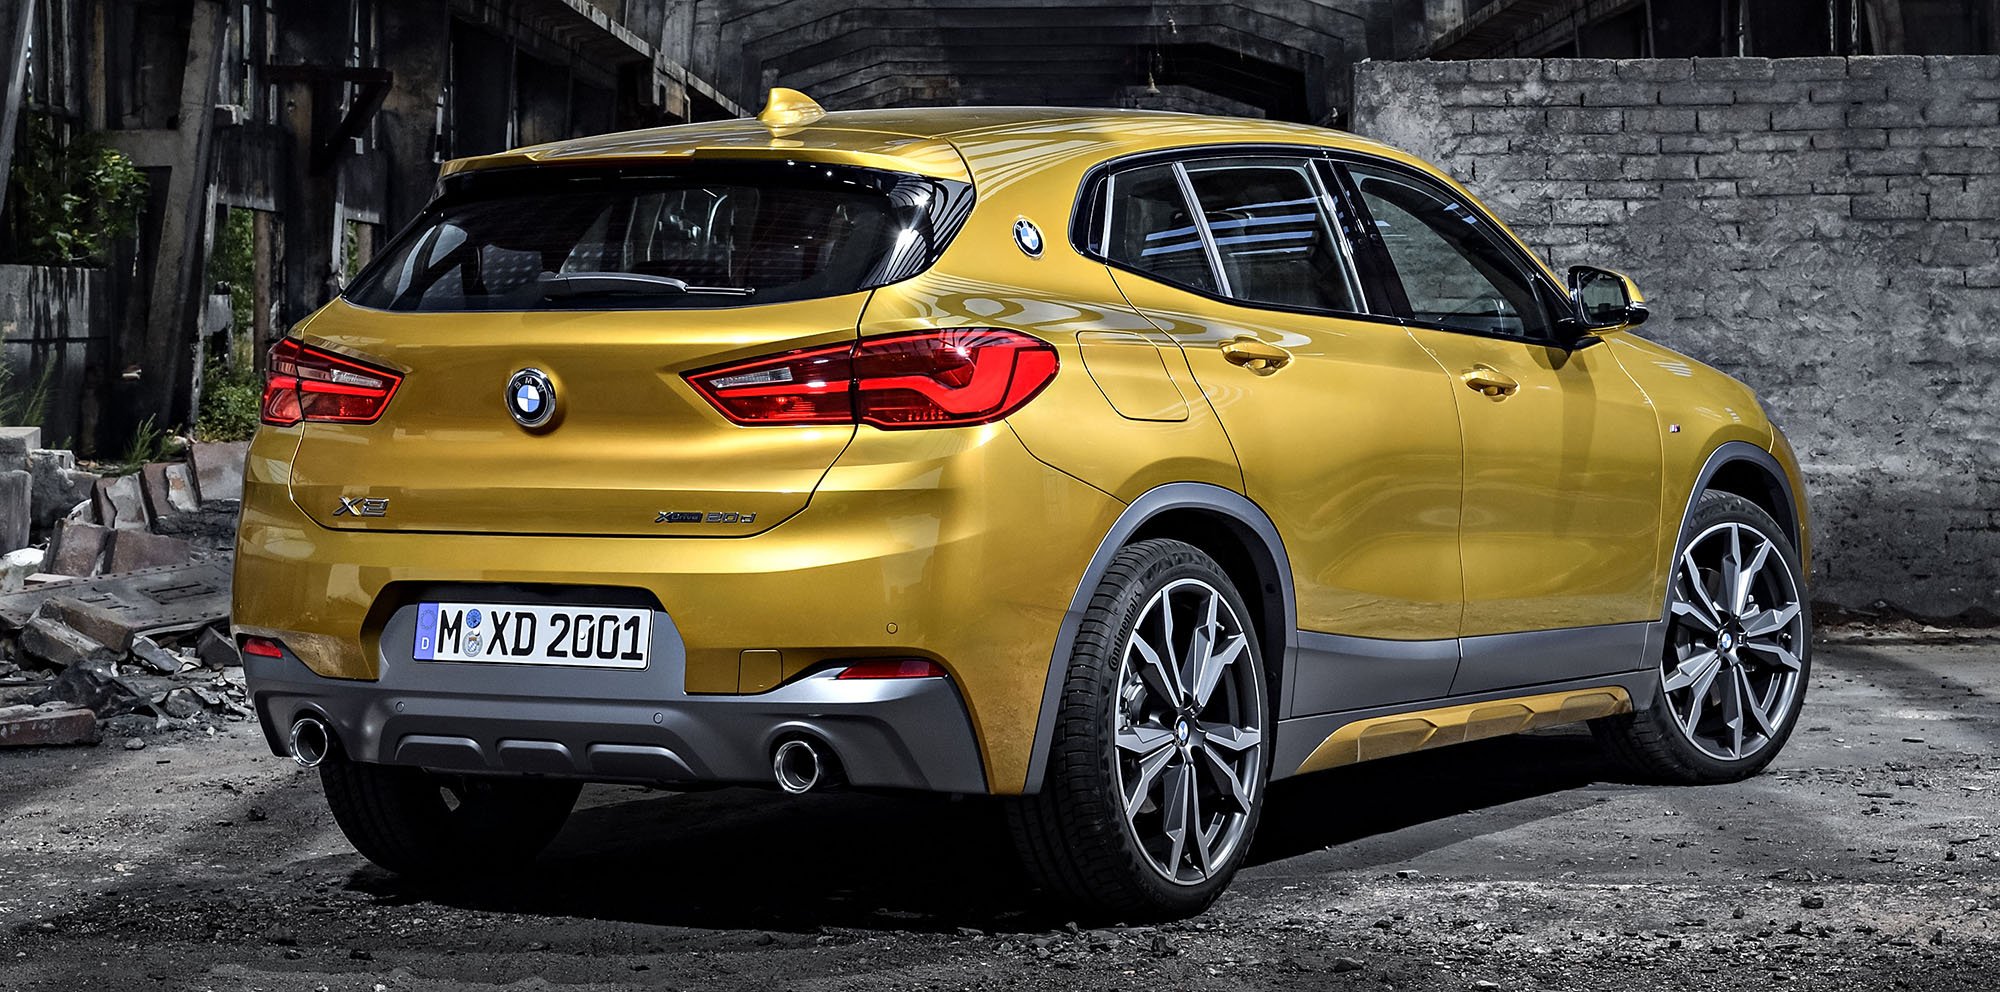 2018 BMW X2 unveiled - UPDATE - Photos (1 of 10)